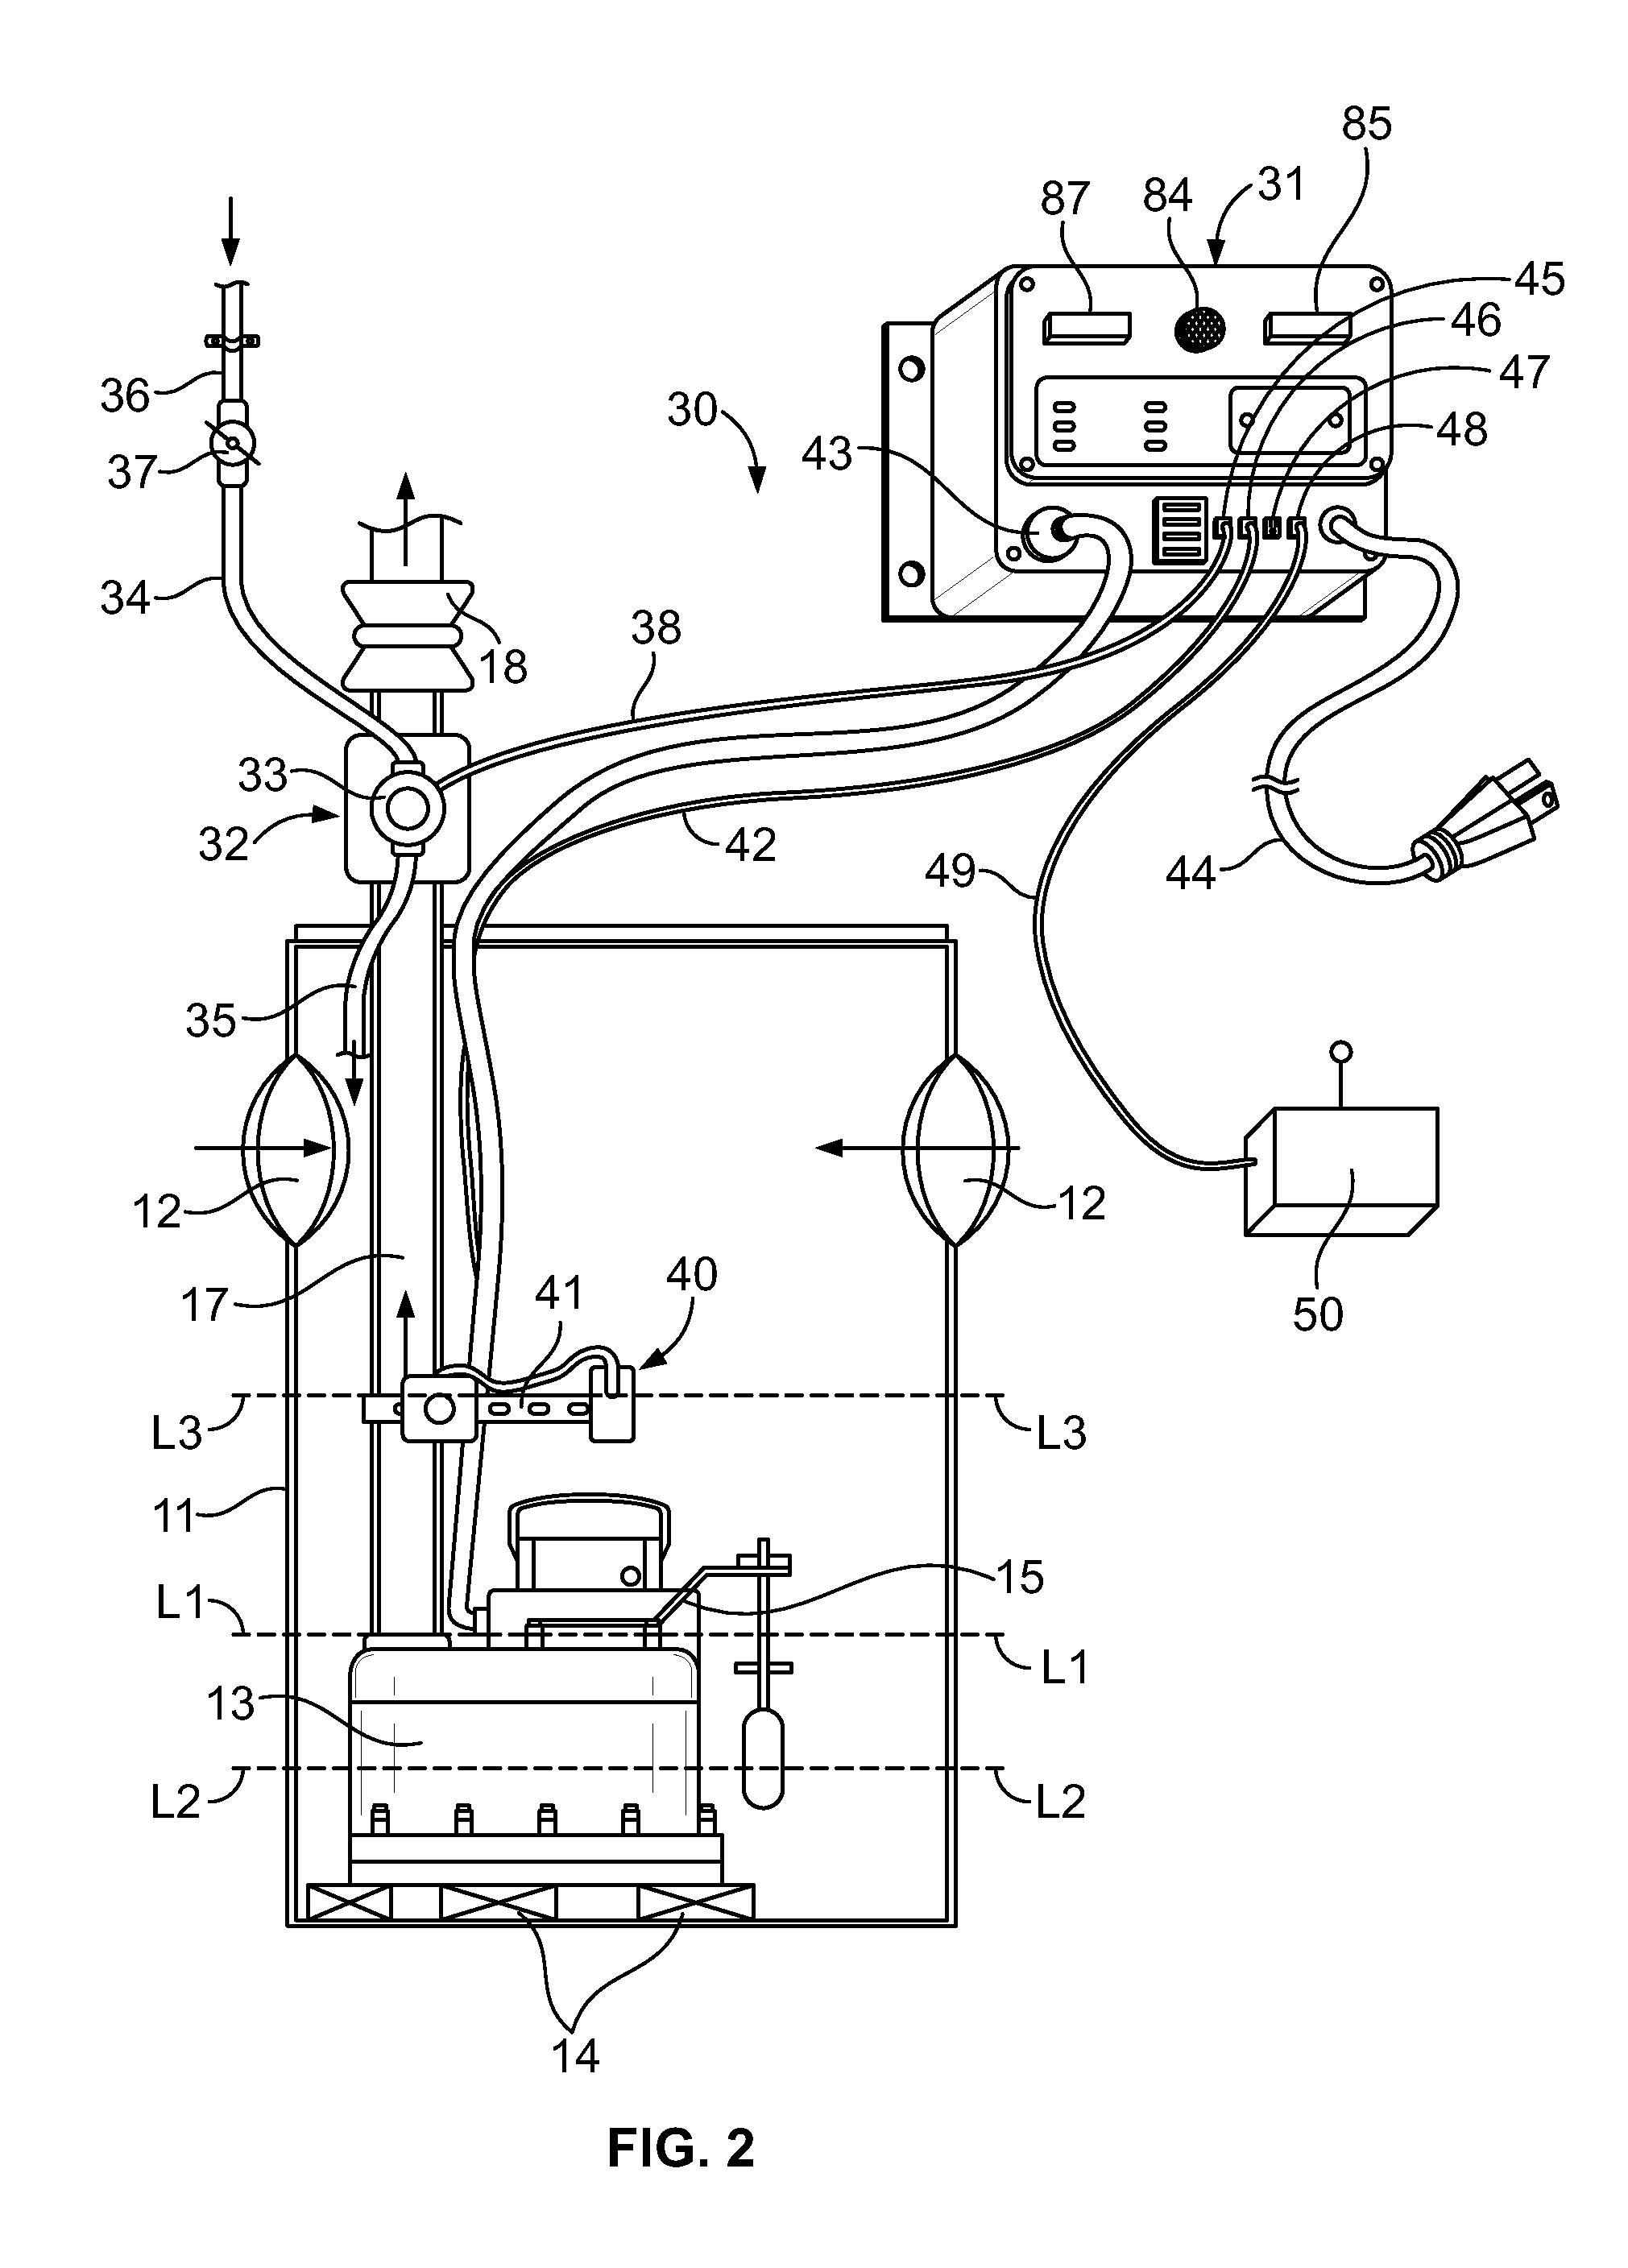 Test and monitoring system for a dual sump pump system